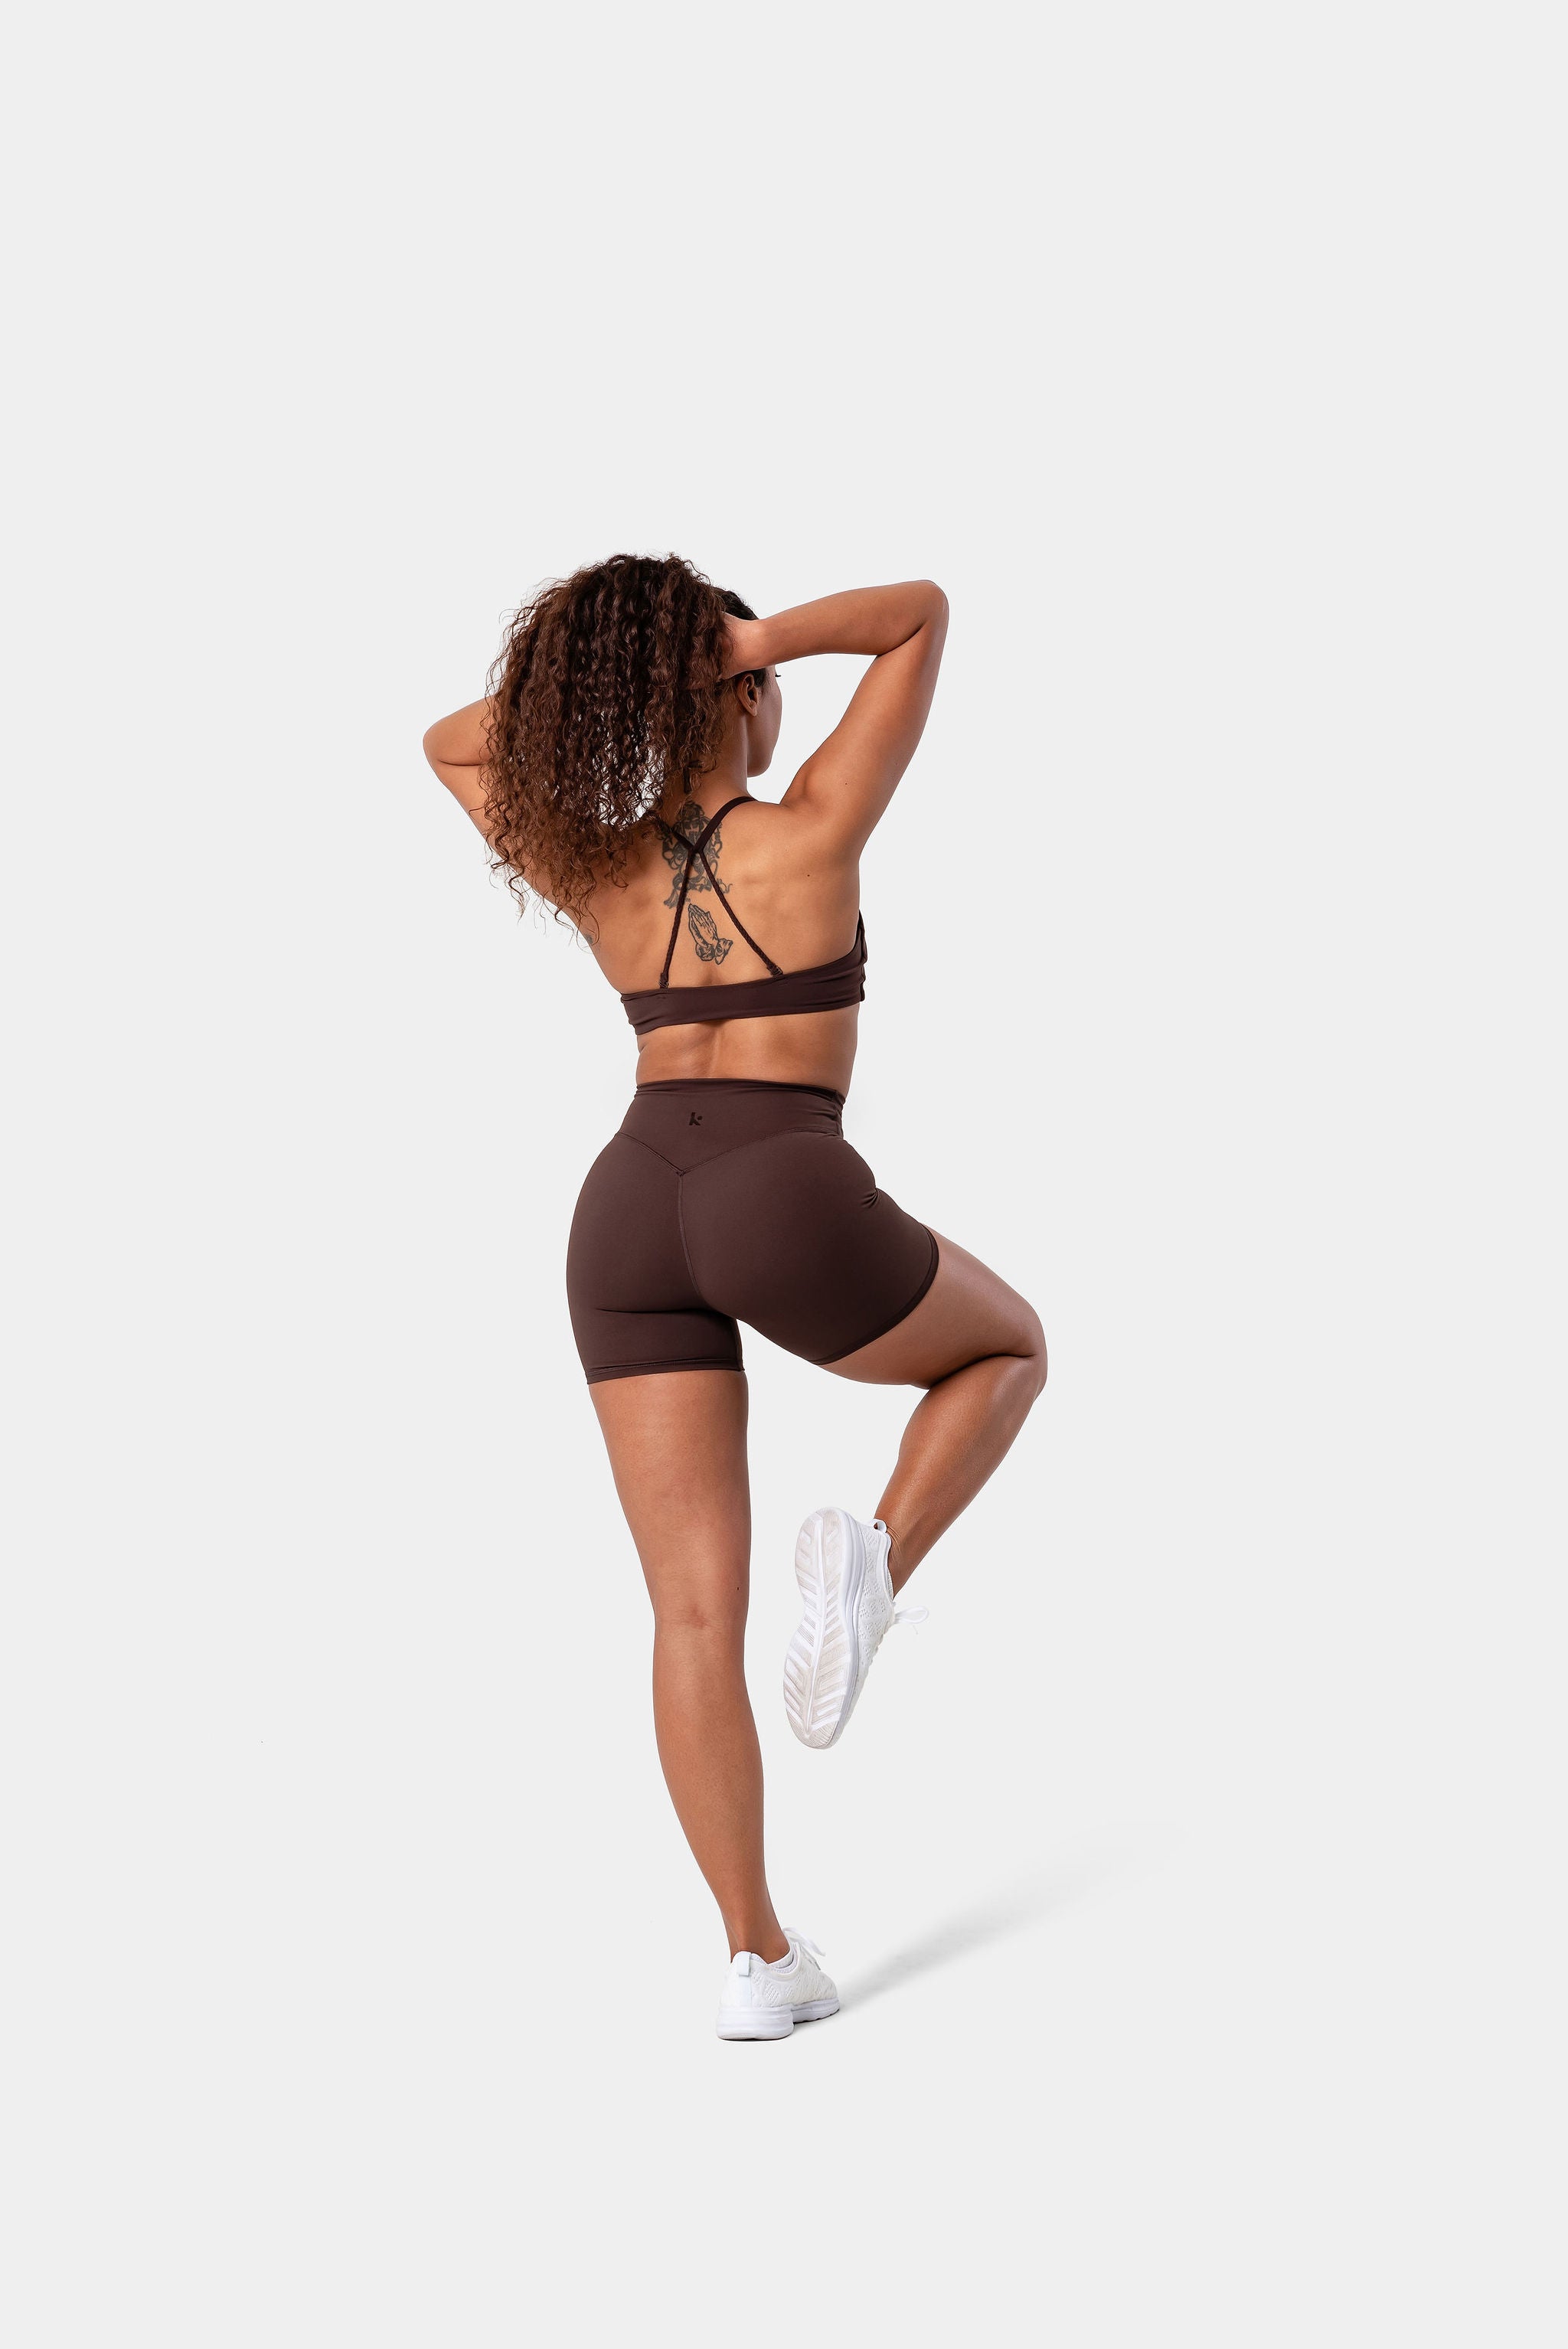 Women's Best NWT $35 [ Small ] Power Seamless Sports Bra in Dark Oak Brown  #5849 - $30 (14% Off Retail) New With Tags - From Naomi